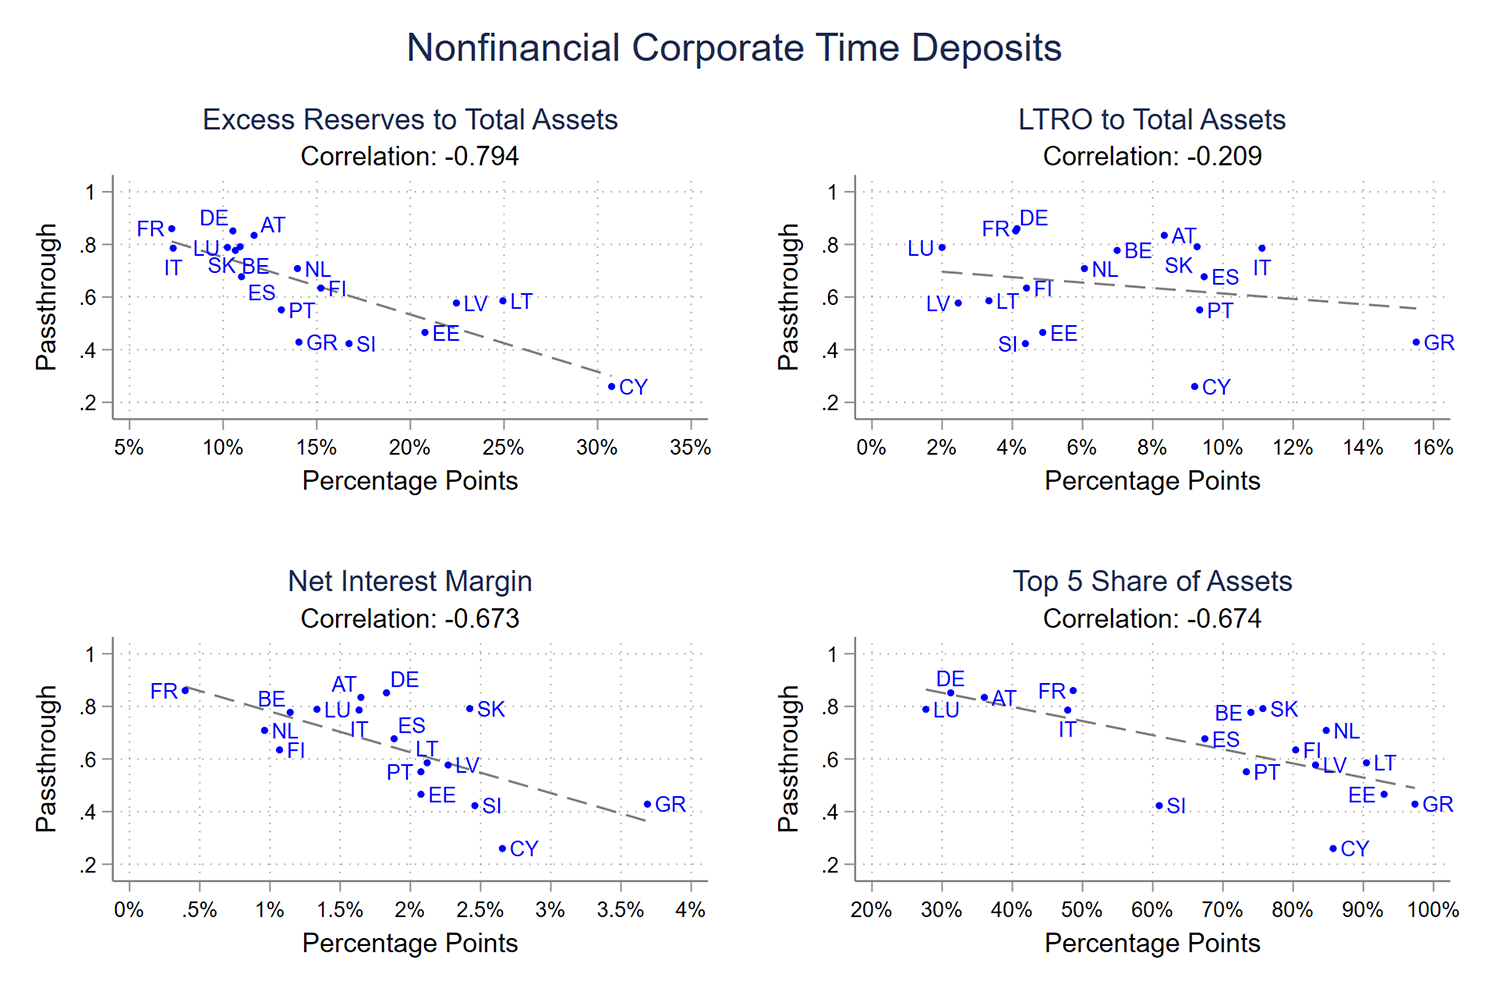 Figure 6. Correlations of Nonfinancial corporate Time Deposit Passthrough with Measures of the Banking System. See accessible link for data.